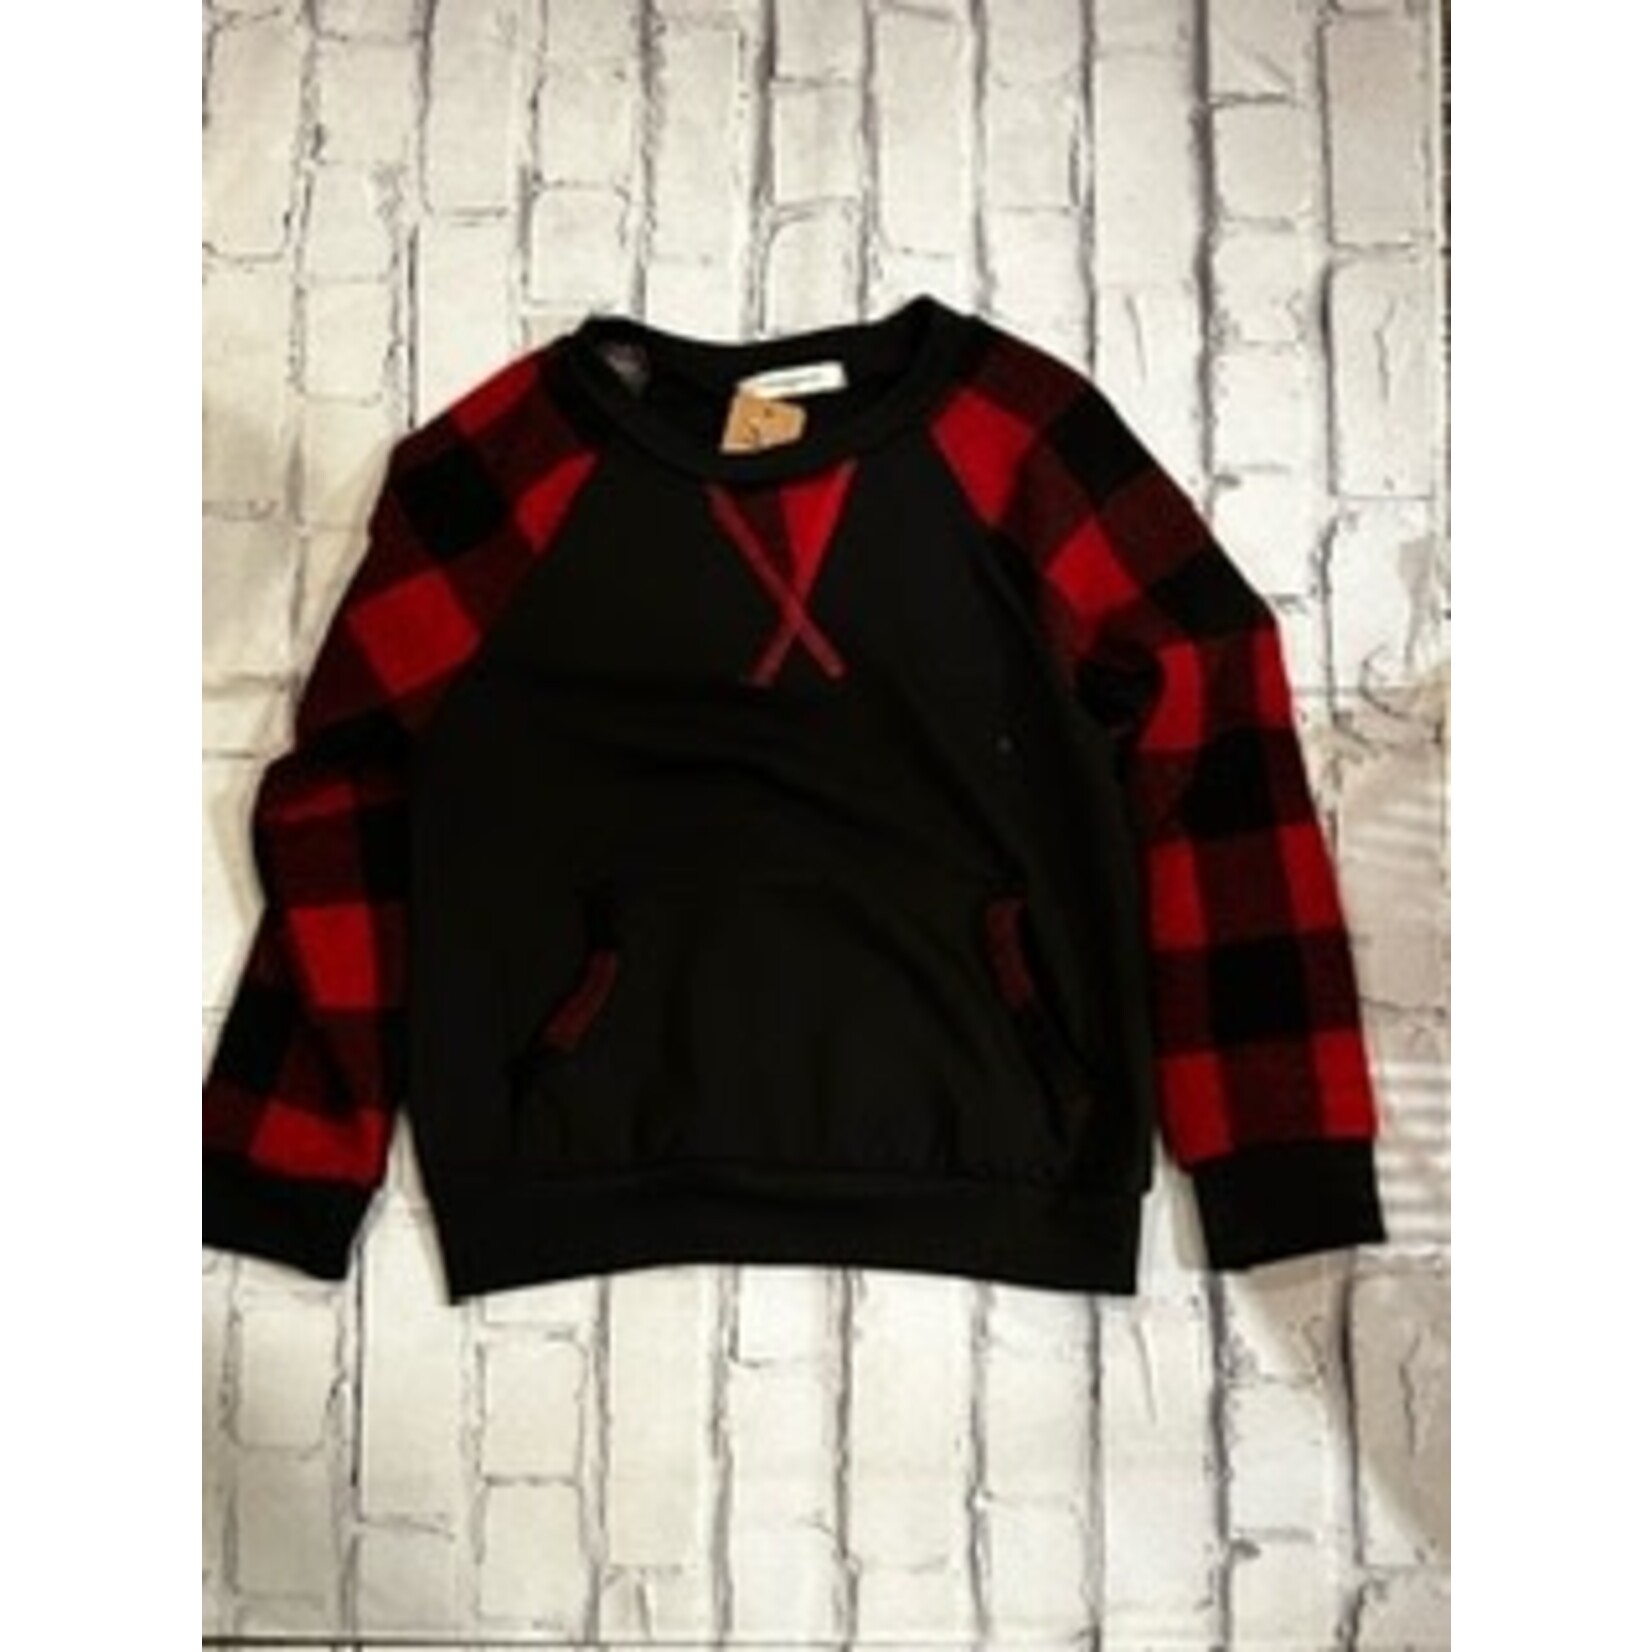 12PM 12PM Long Sleeve Toddler Top with Pocket Buffalo Plaid Black